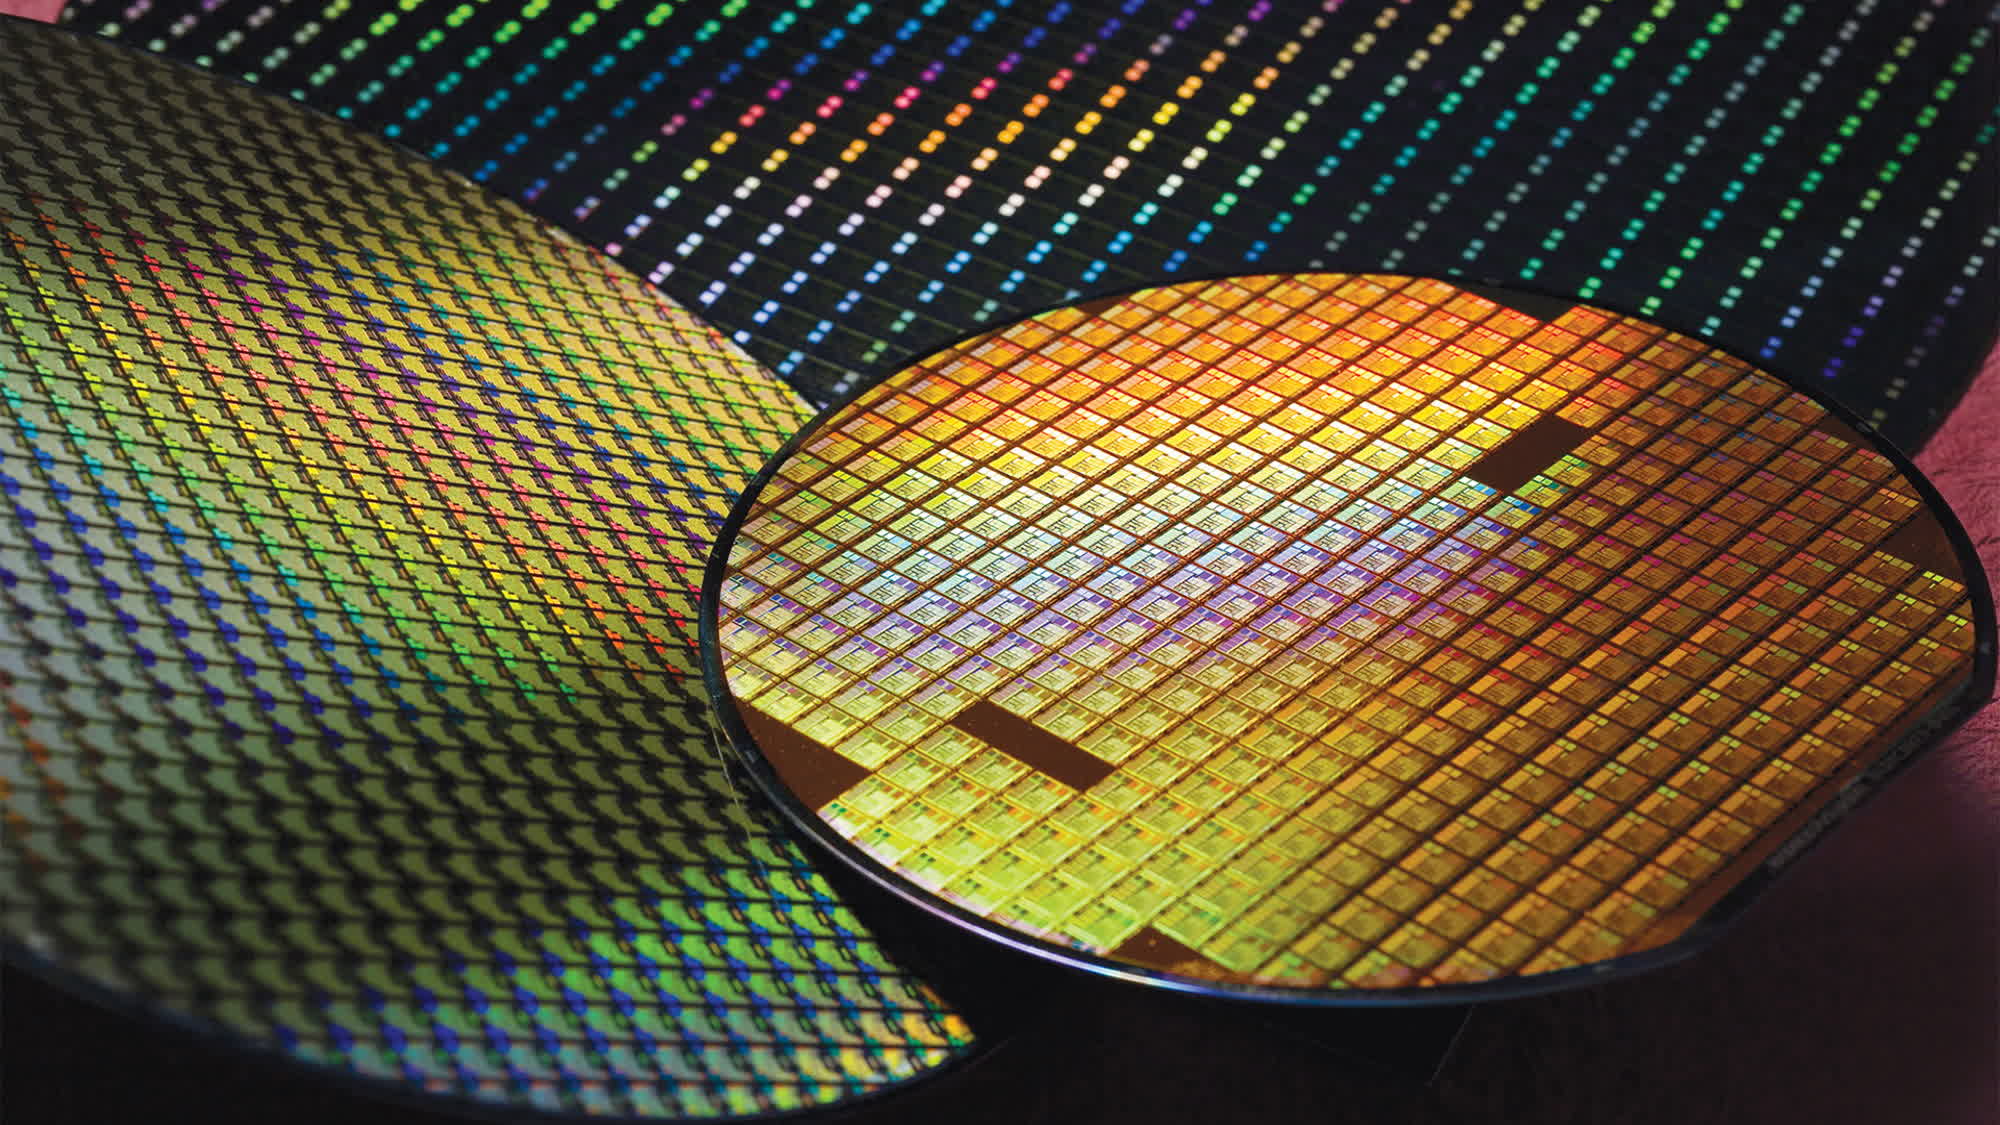 Silicon wafer shipments suffered a steep decline in the first quarter of 2023